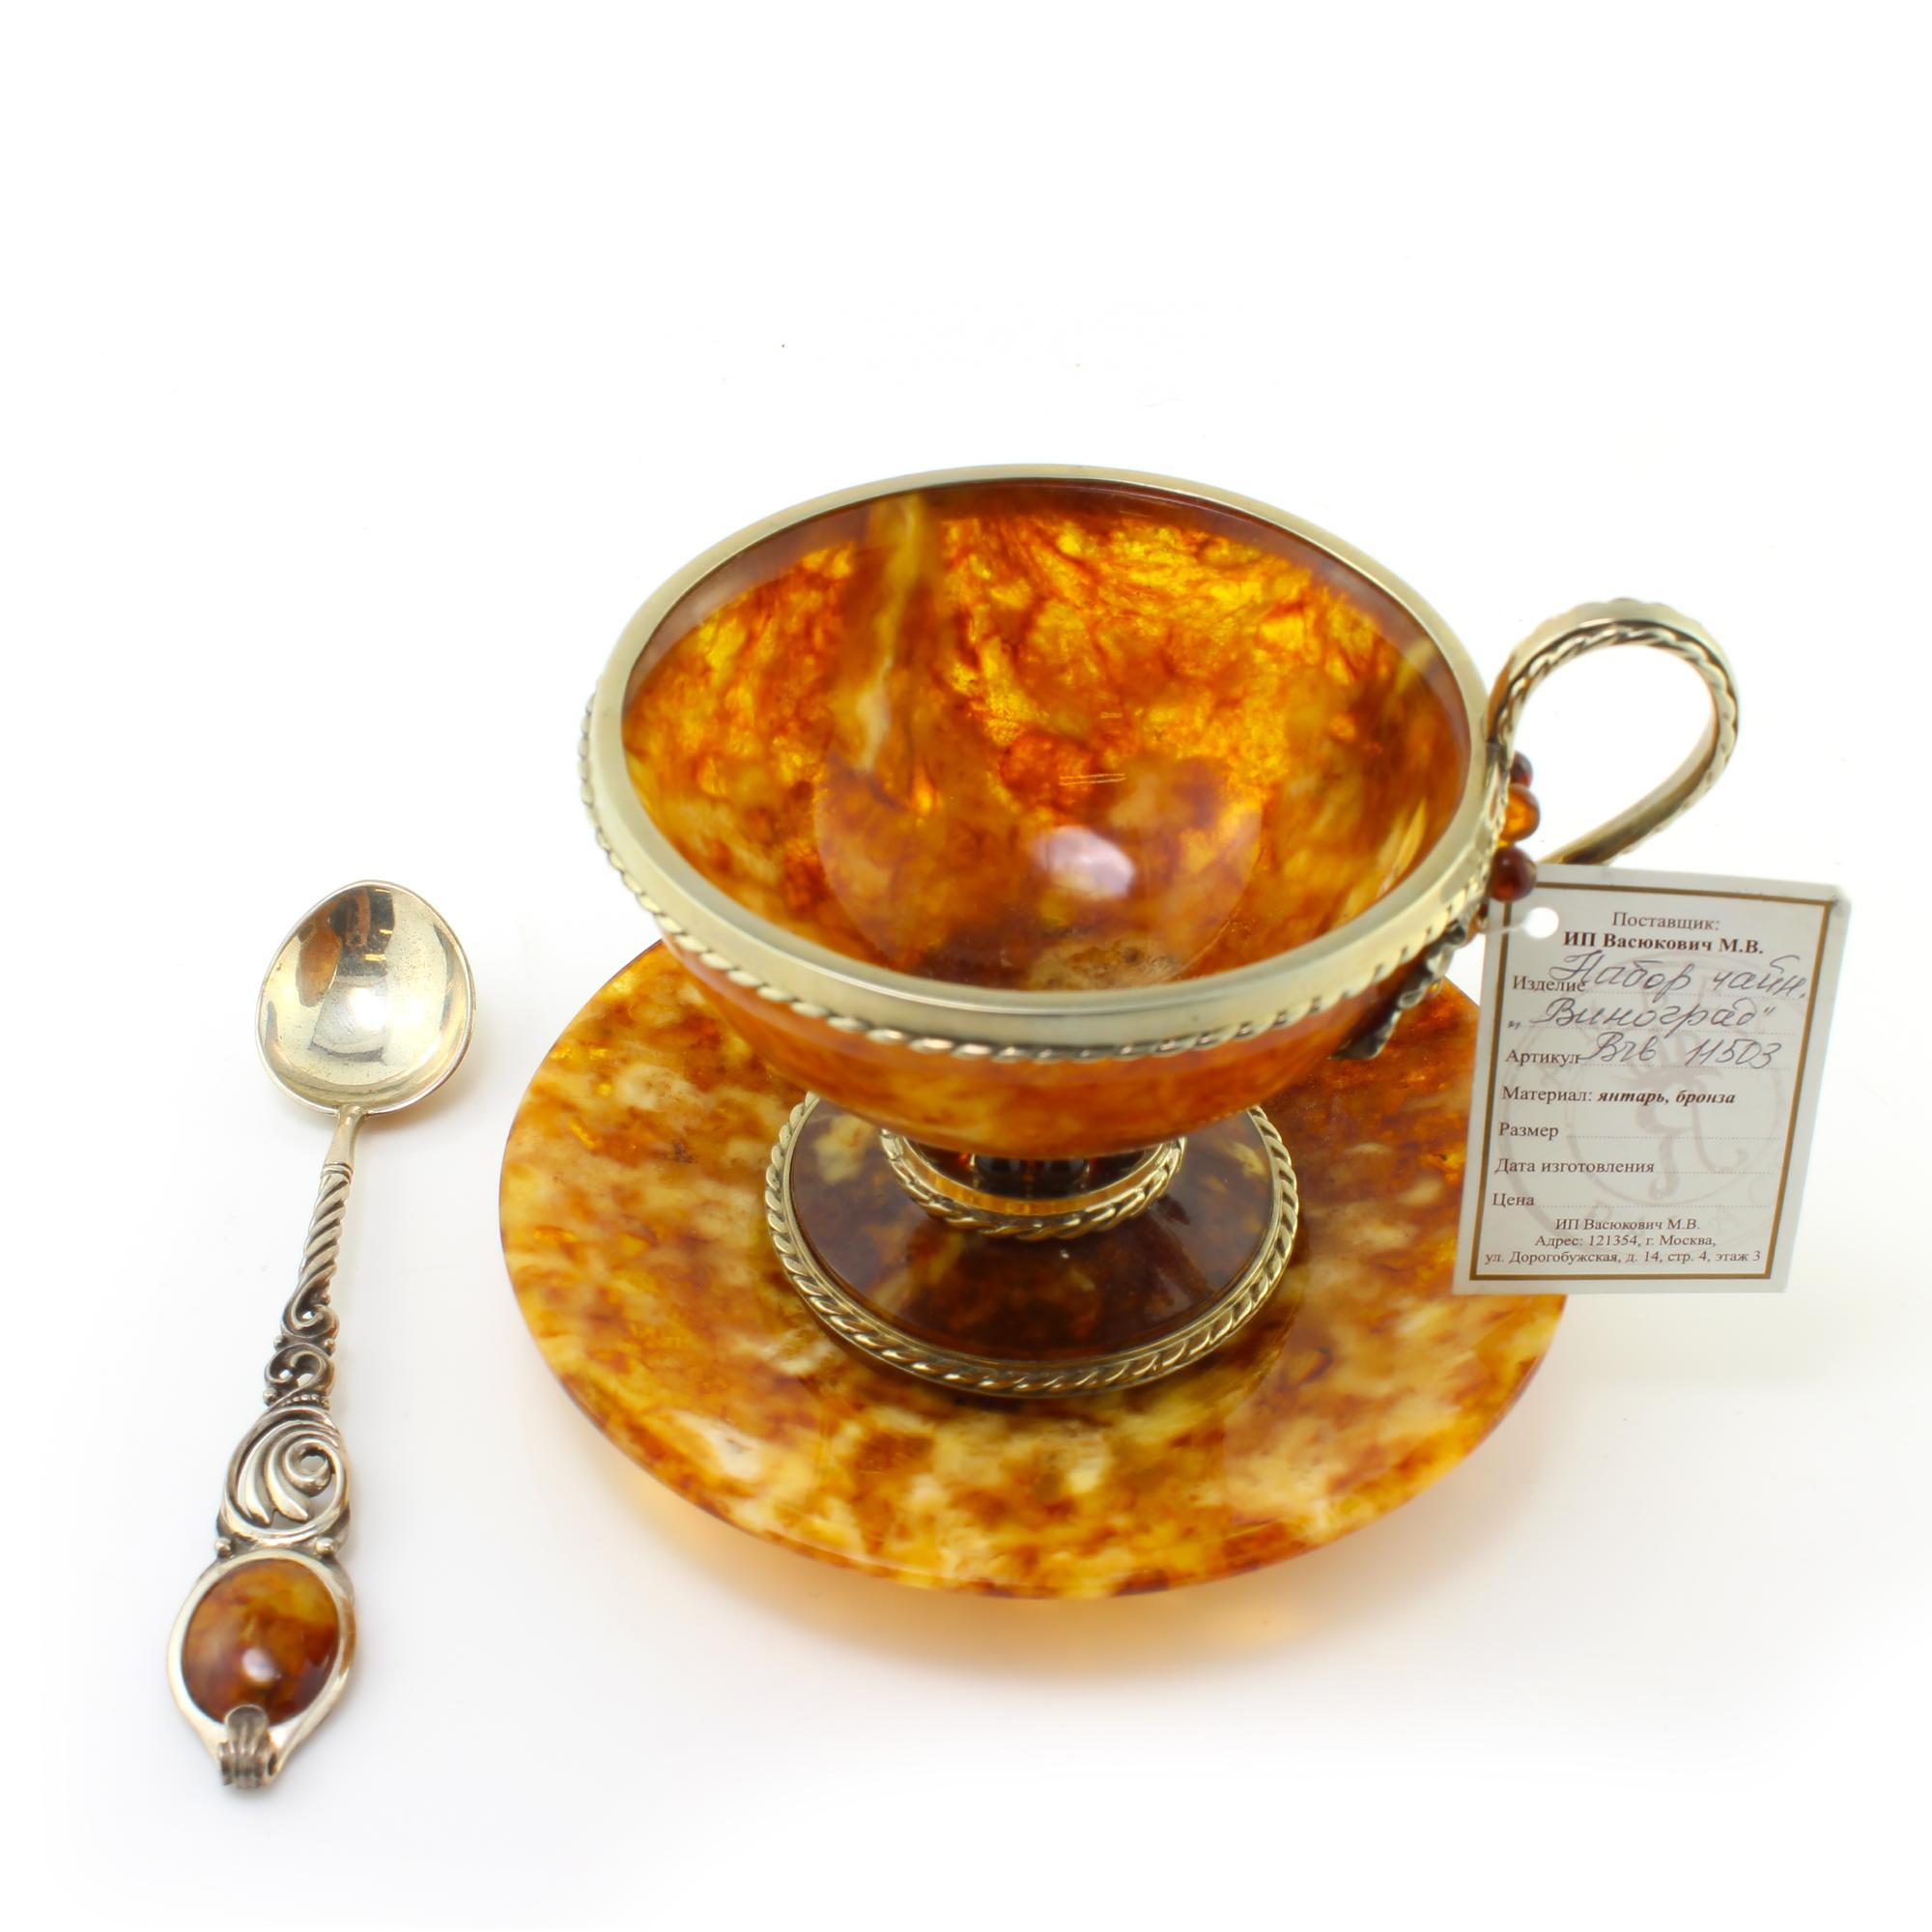 Vintage Russian silver and natural baltic amber teacup set in original box.
Made in Russia Circa. 1990s
Russian silver tested positive .875 purity.
Fully hallmarked

Dimensions -
Cup Size : 10.6 x 8.5 x 8.2 cm
Weight : 122 grams

Plate Size